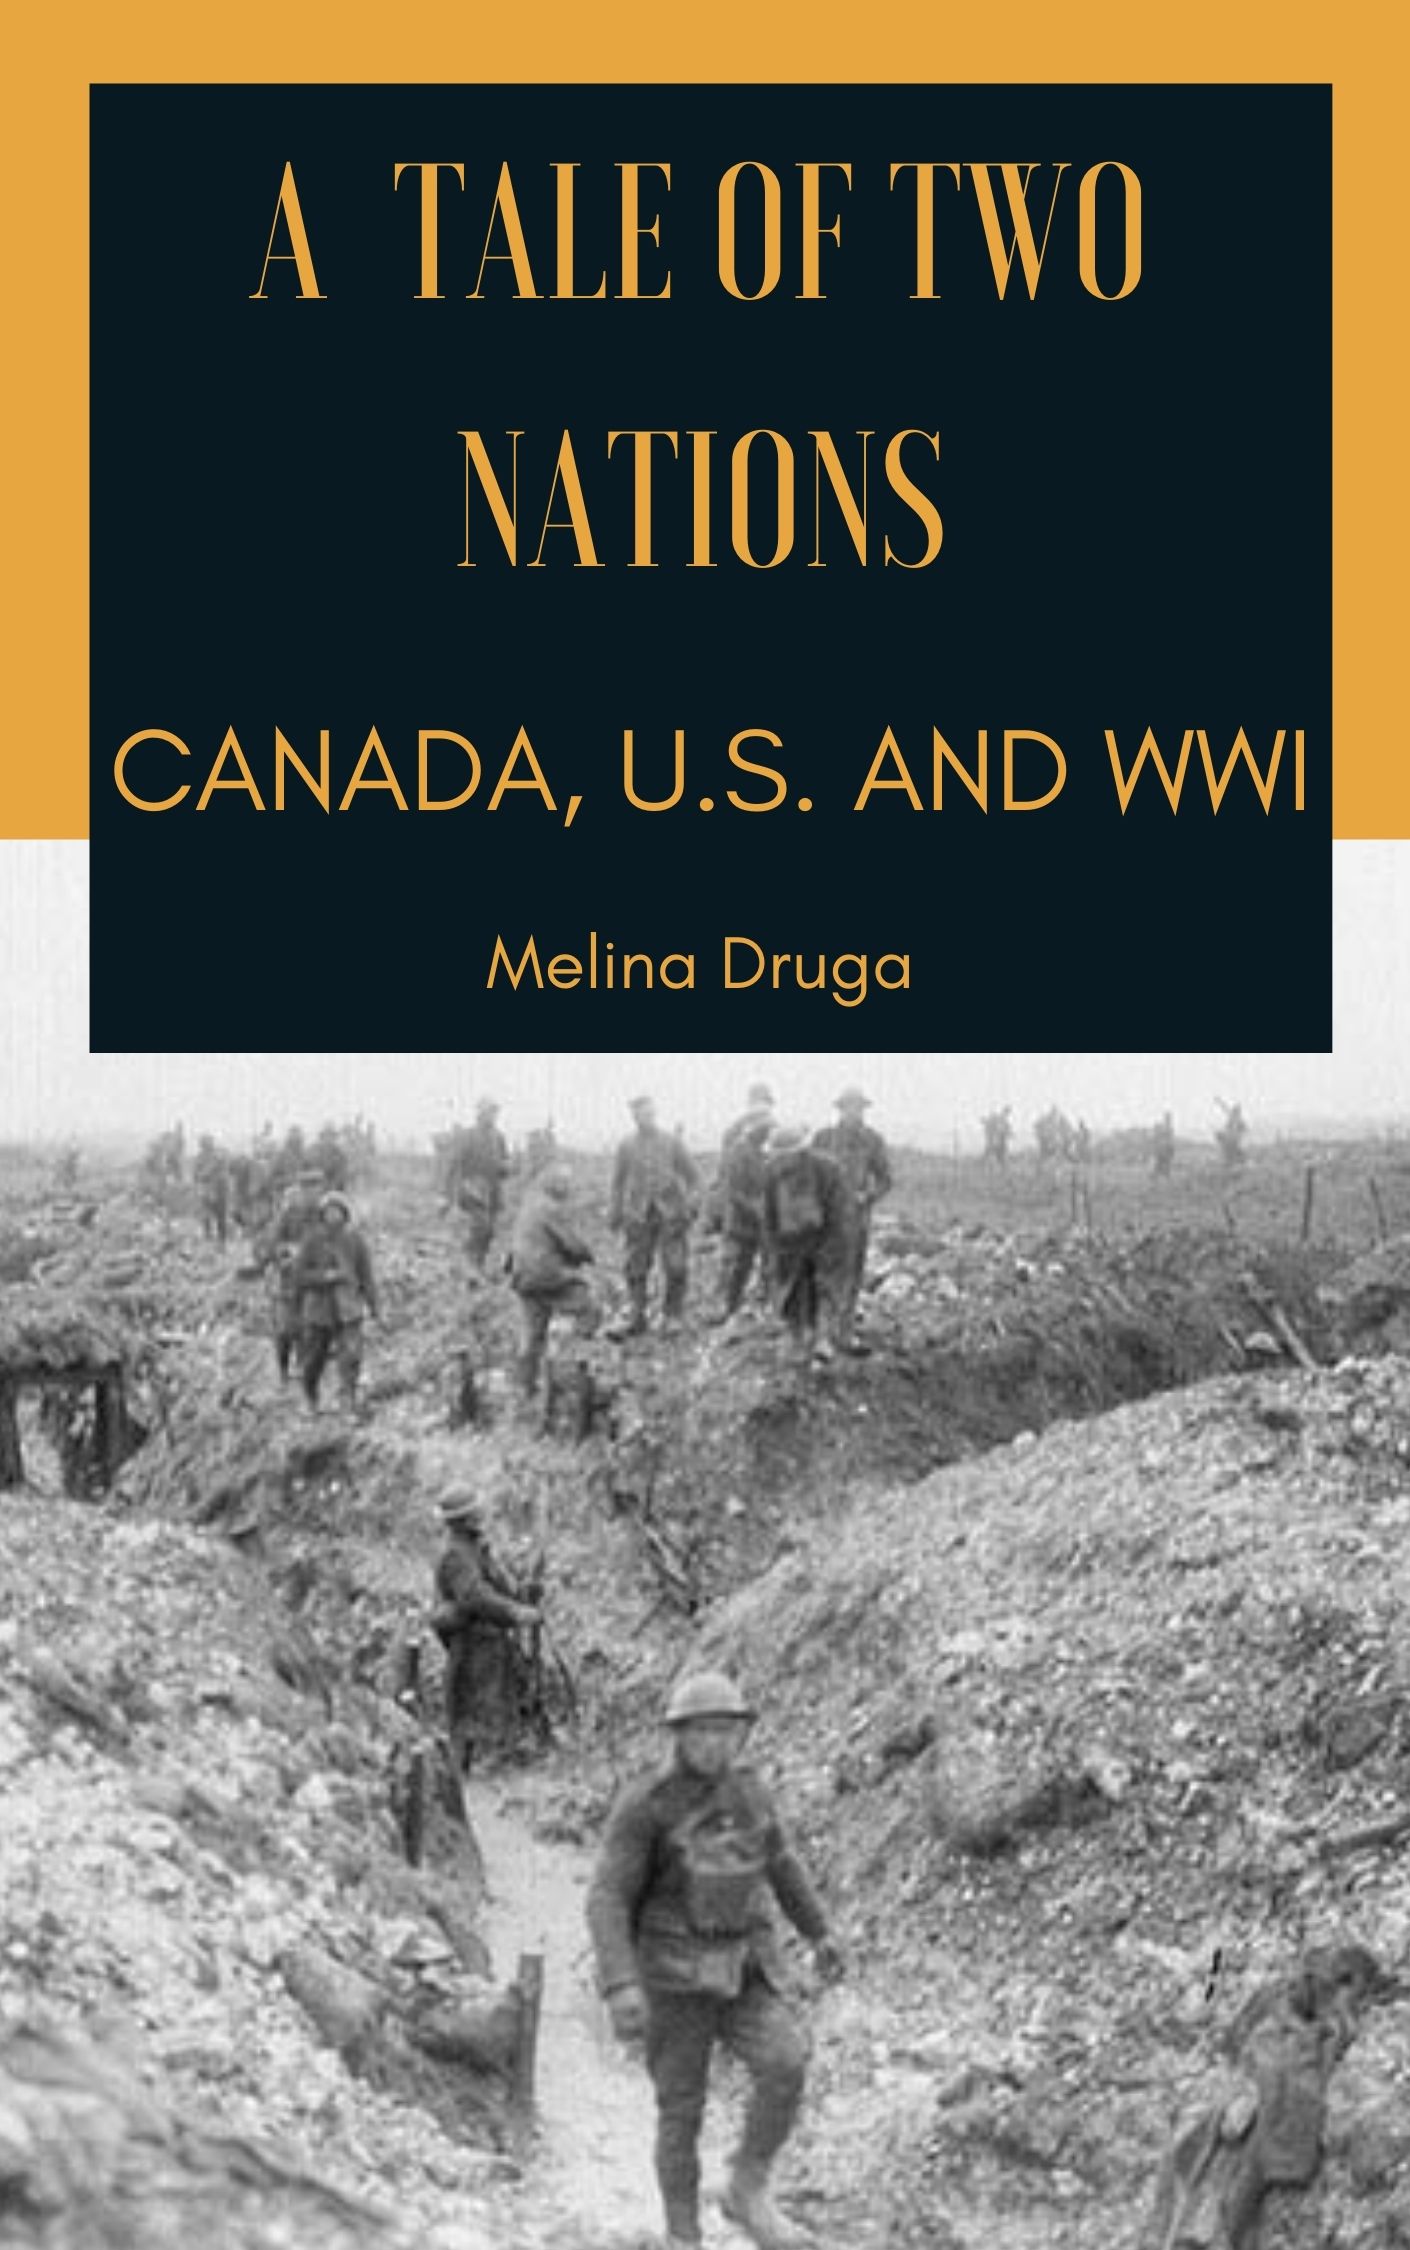 A Tale of Two Nations: Canada, U.S. and WWI by Melina Druga